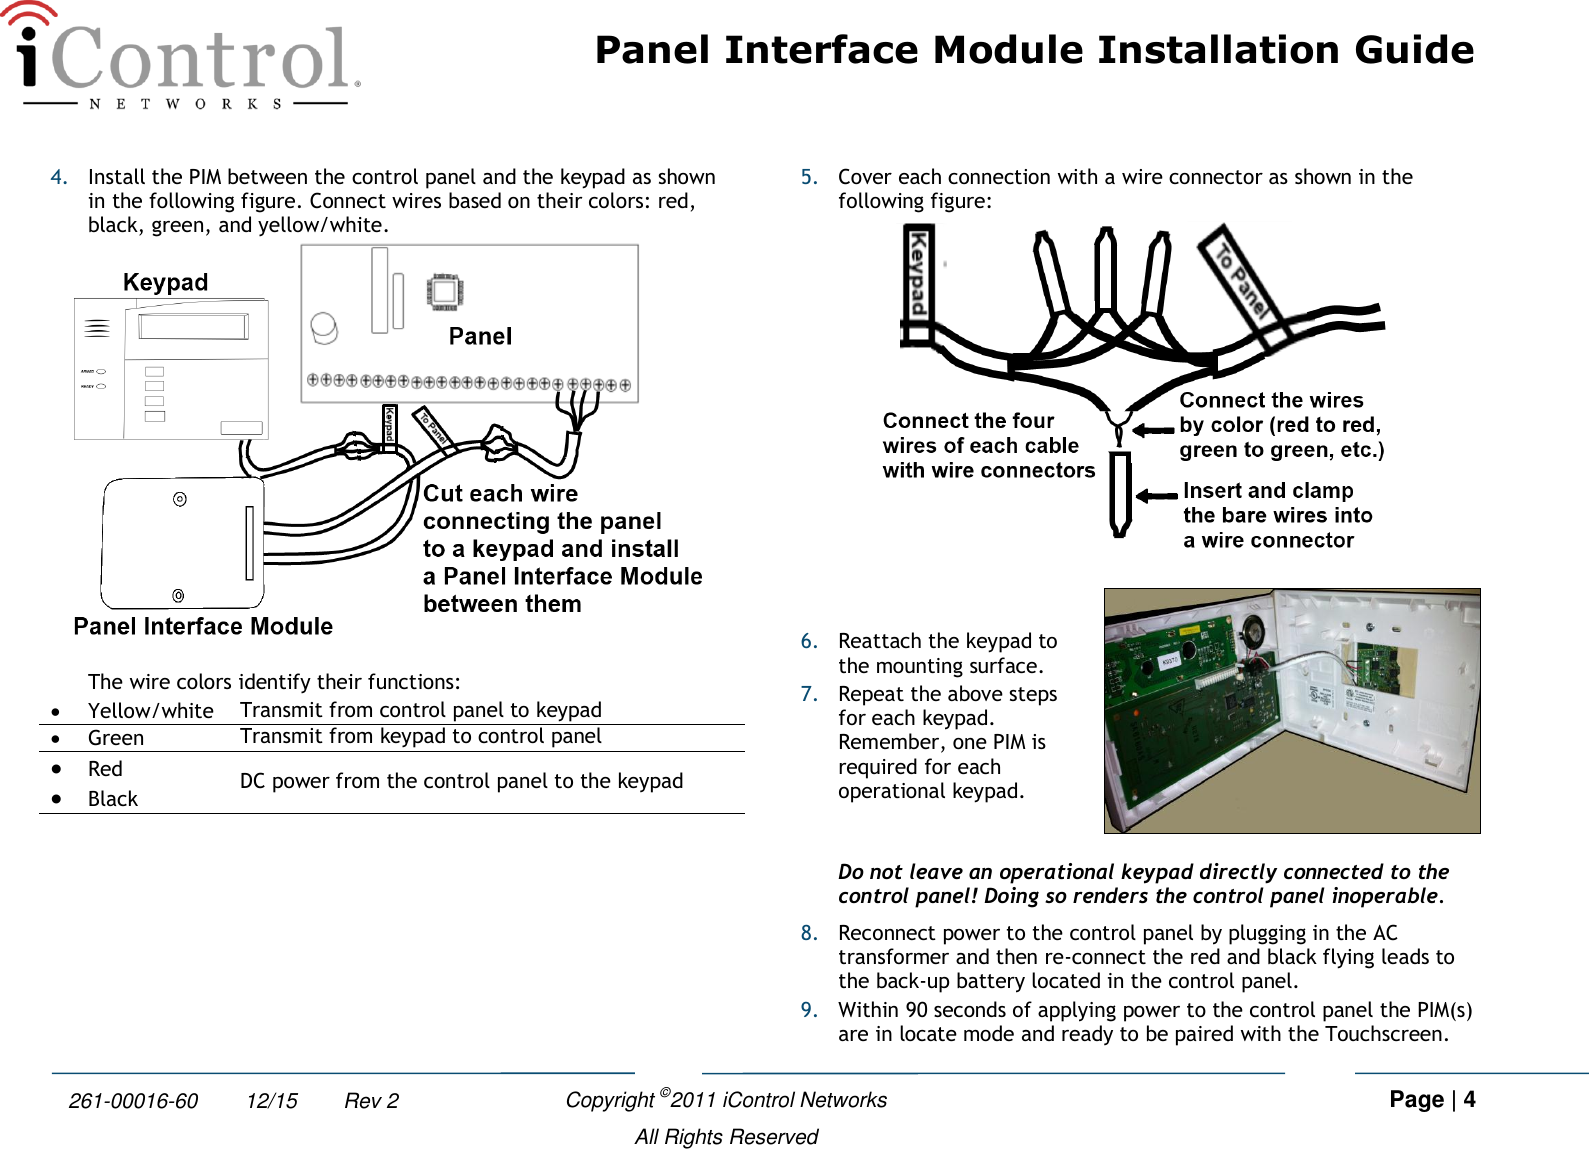 Panel Interface Module Installation Guide    Copyright ©2011 iControl Networks   Page | 4  All Rights Reserved 261-00016-60        12/15        Rev 2 4. Install the PIM between the control panel and the keypad as shown in the following figure. Connect wires based on their colors: red, black, green, and yellow/white.   The wire colors identify their functions:  Yellow/white Transmit from control panel to keypad  Green Transmit from keypad to control panel  Red DC power from the control panel to the keypad  Black  5. Cover each connection with a wire connector as shown in the following figure:   6. Reattach the keypad to the mounting surface. 7. Repeat the above steps for each keypad. Remember, one PIM is required for each operational keypad.  Do not leave an operational keypad directly connected to the control panel! Doing so renders the control panel inoperable.  8. Reconnect power to the control panel by plugging in the AC transformer and then re-connect the red and black flying leads to the back-up battery located in the control panel. 9. Within 90 seconds of applying power to the control panel the PIM(s) are in locate mode and ready to be paired with the Touchscreen.  